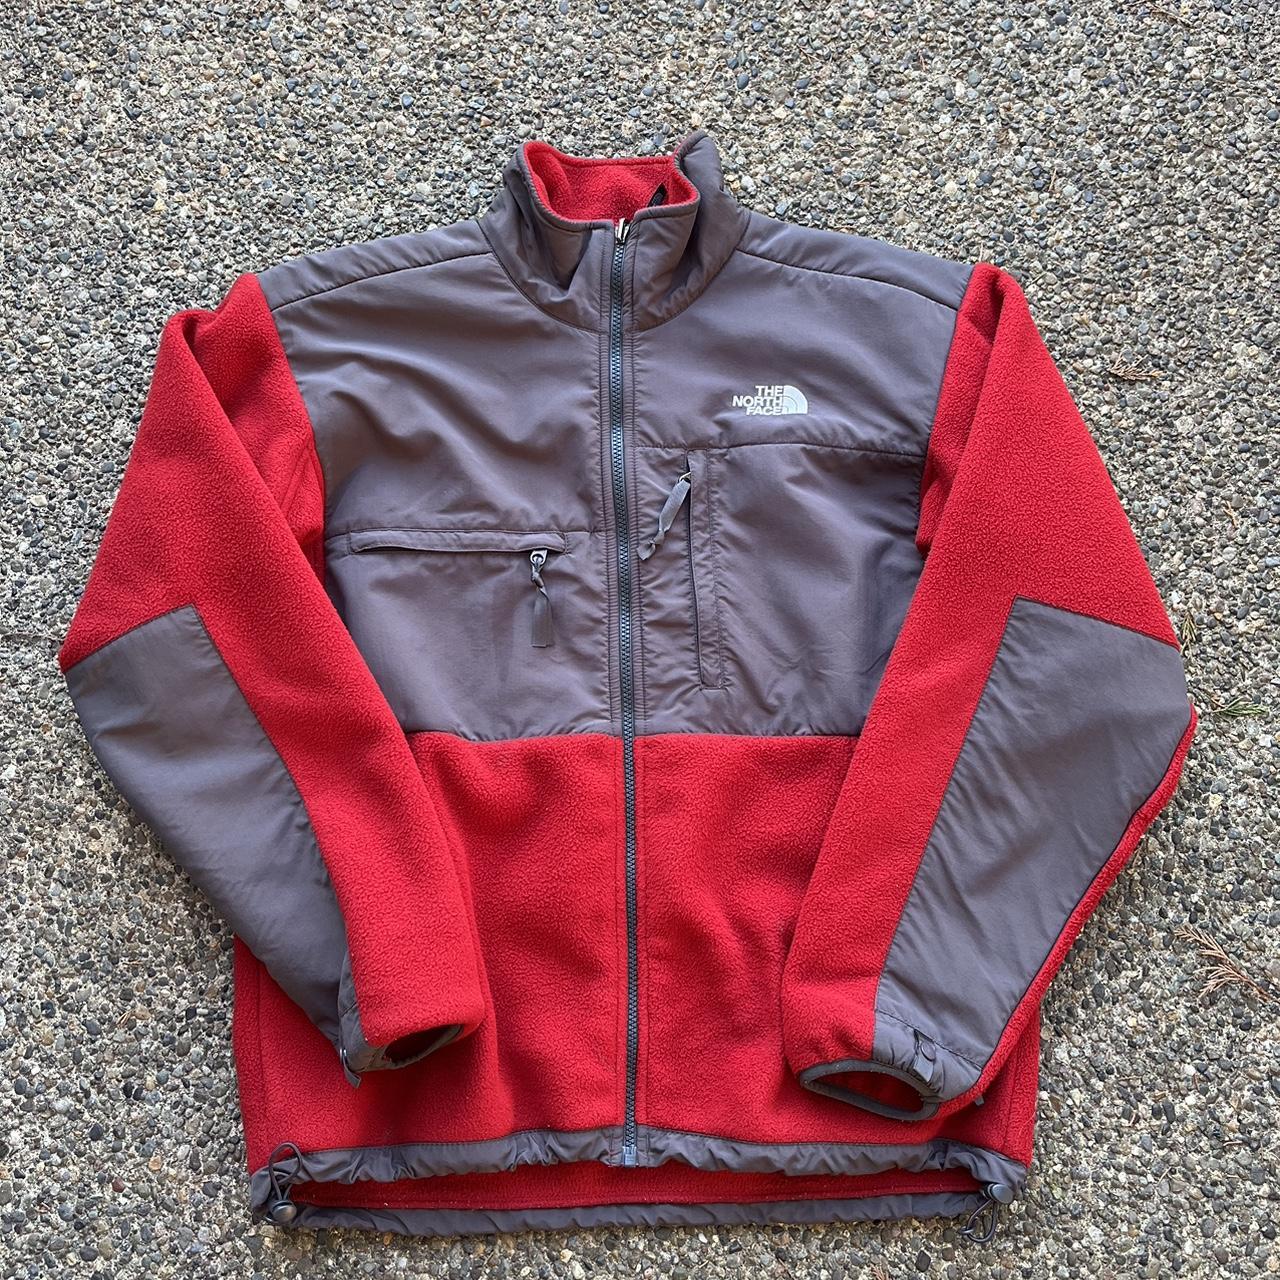 The North Face Men's Red and Grey Jacket